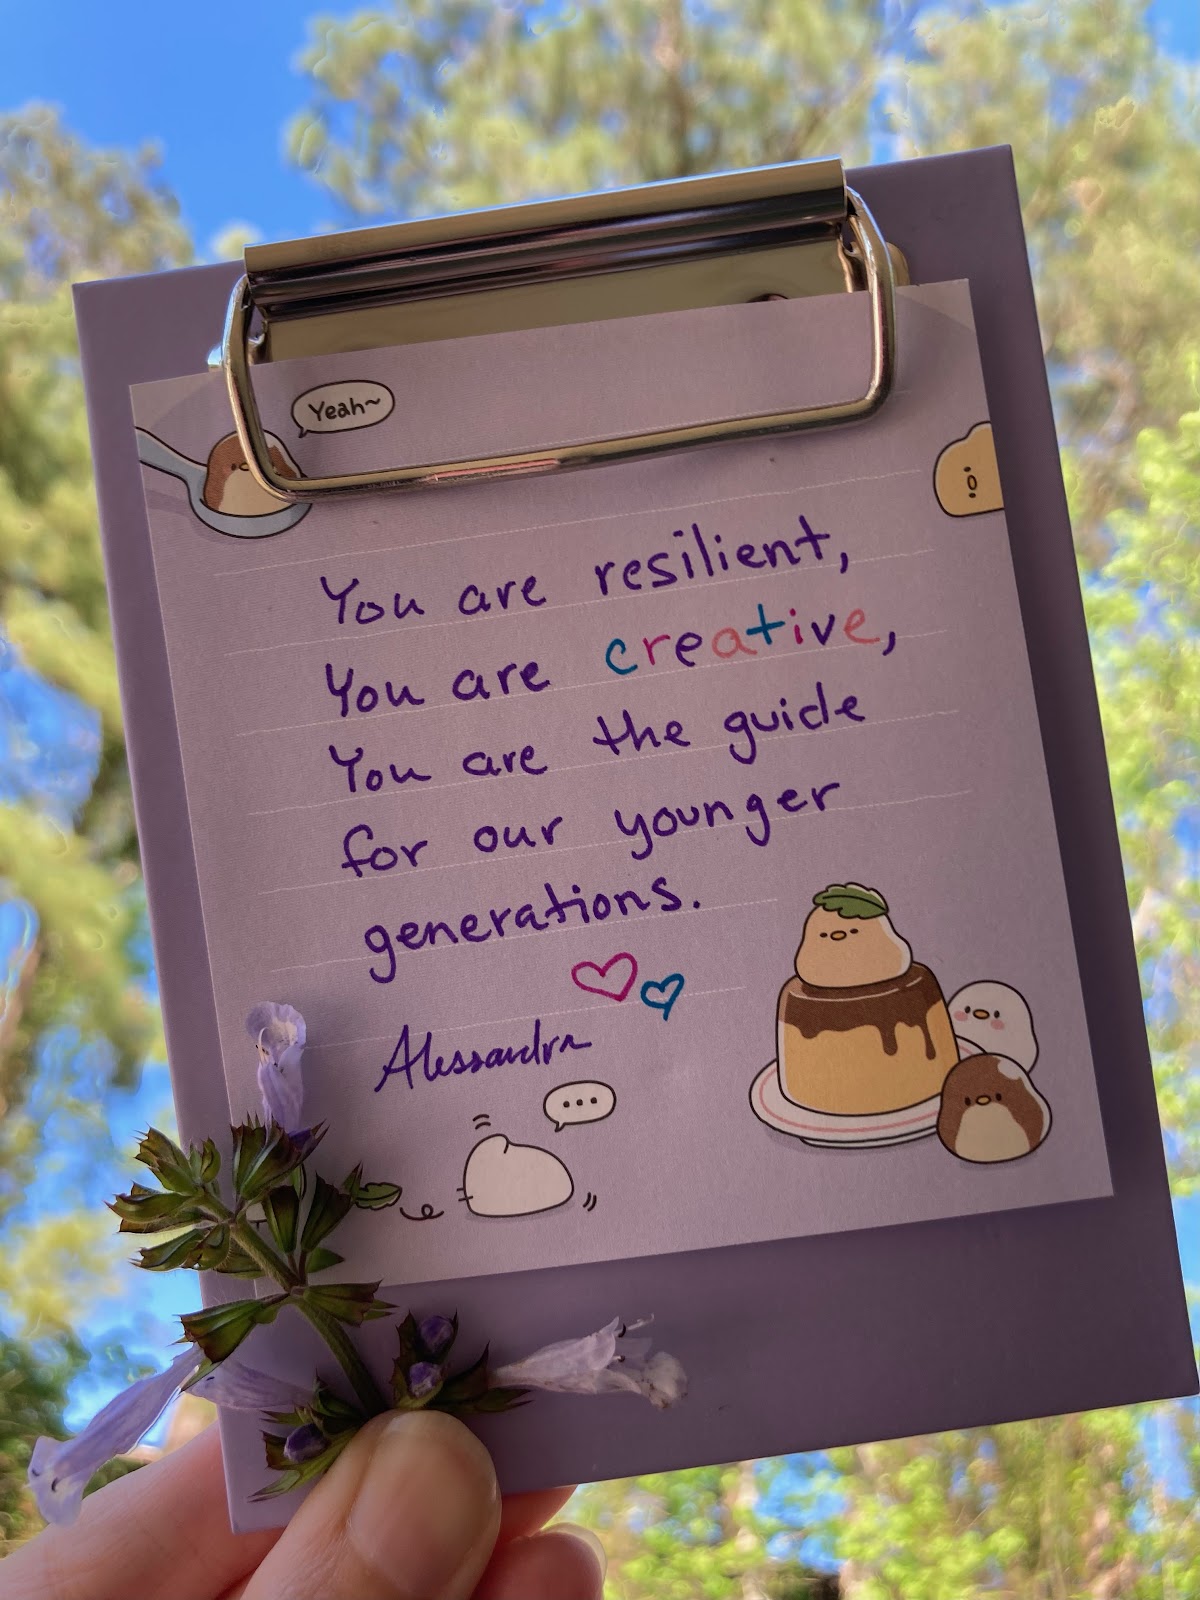 A handwritten note from Alessandra on light purple note paper that reads: "You are resilient, you are creative, you are the guide for our younger generations." 